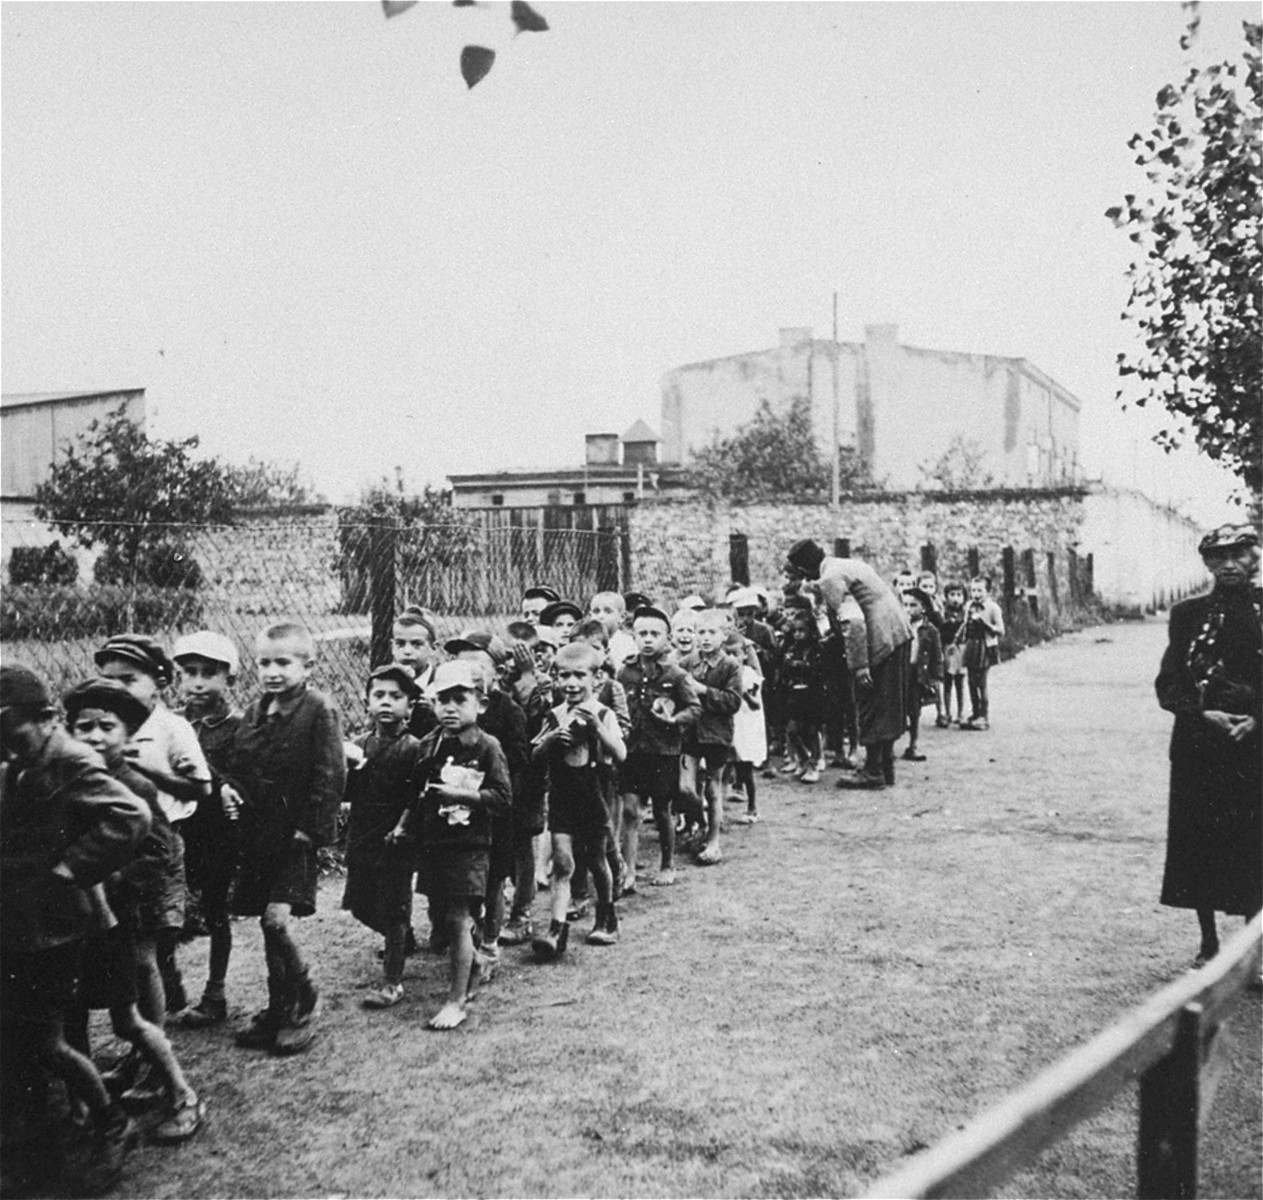 Children from the Marysin colony who were rounded-up during the "Gehsperre" action in the Lodz ghetto, march in a long column towards a deportation assembly point.